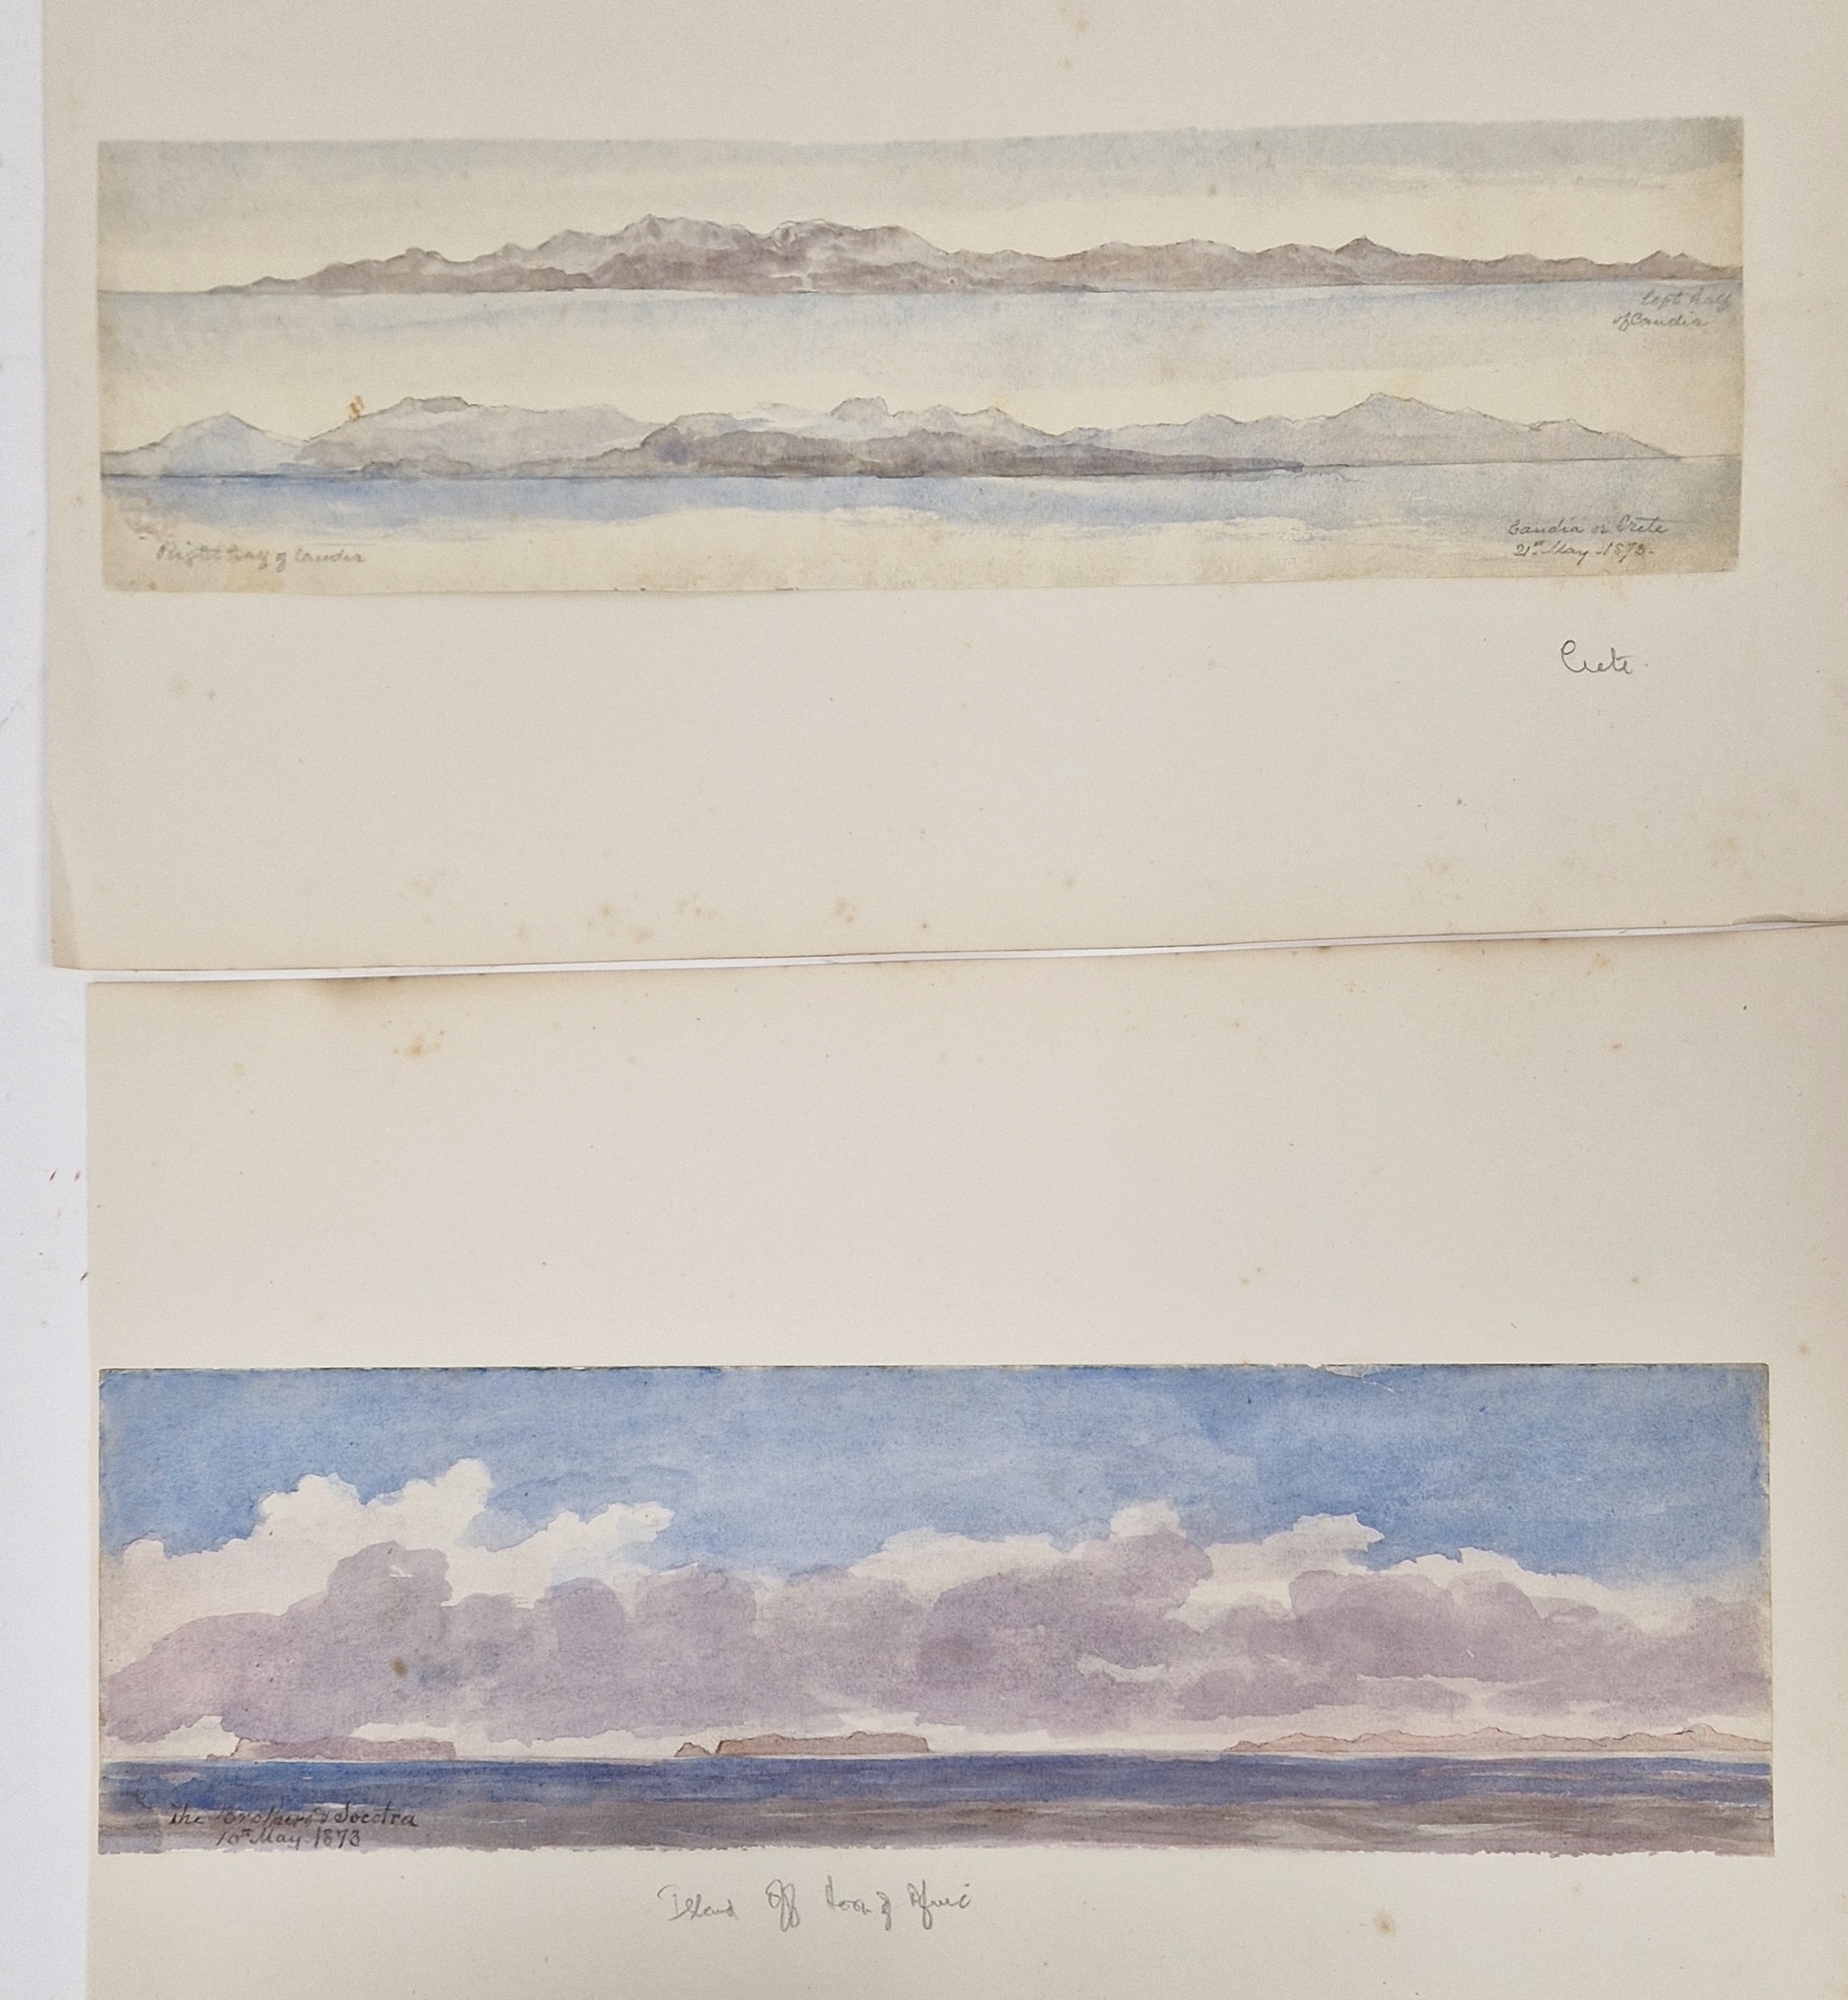 Watercolour drawings - collection Attrib. A H. Walter " A Passage from India to England 1873" - Image 10 of 13